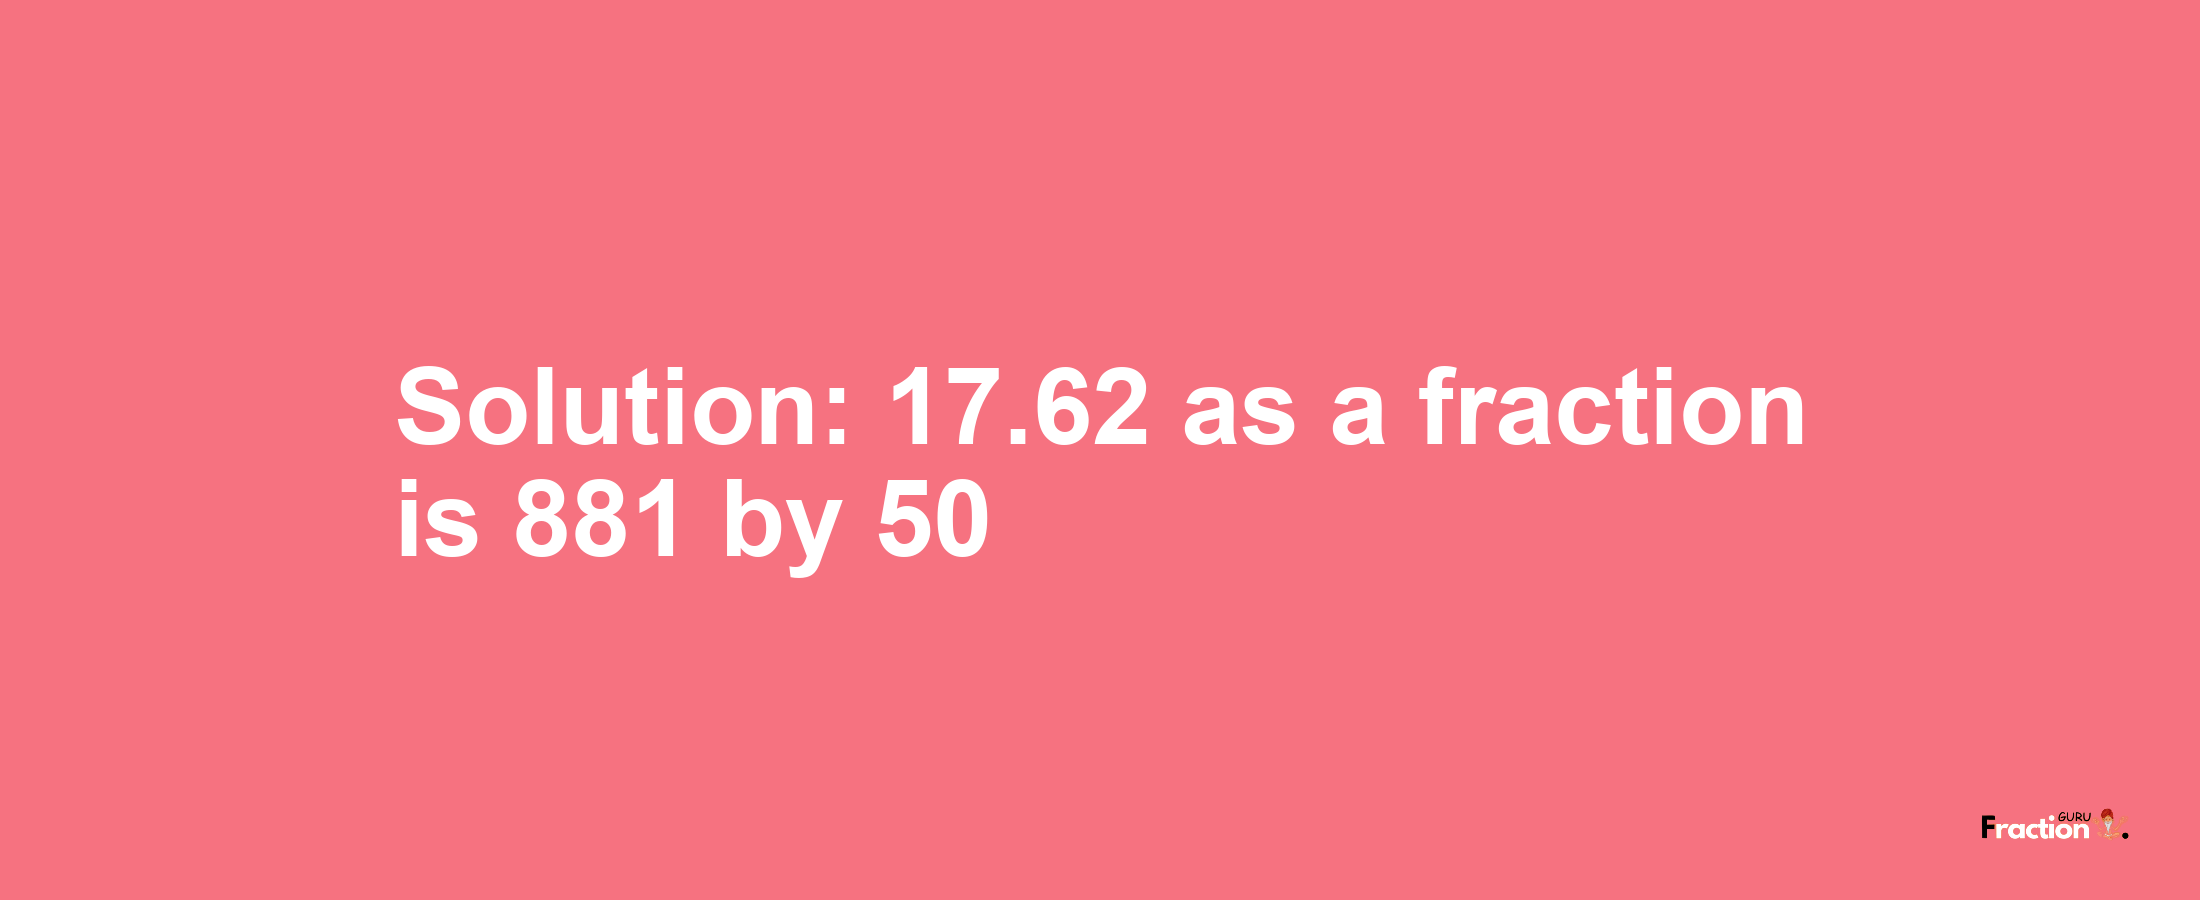 Solution:17.62 as a fraction is 881/50